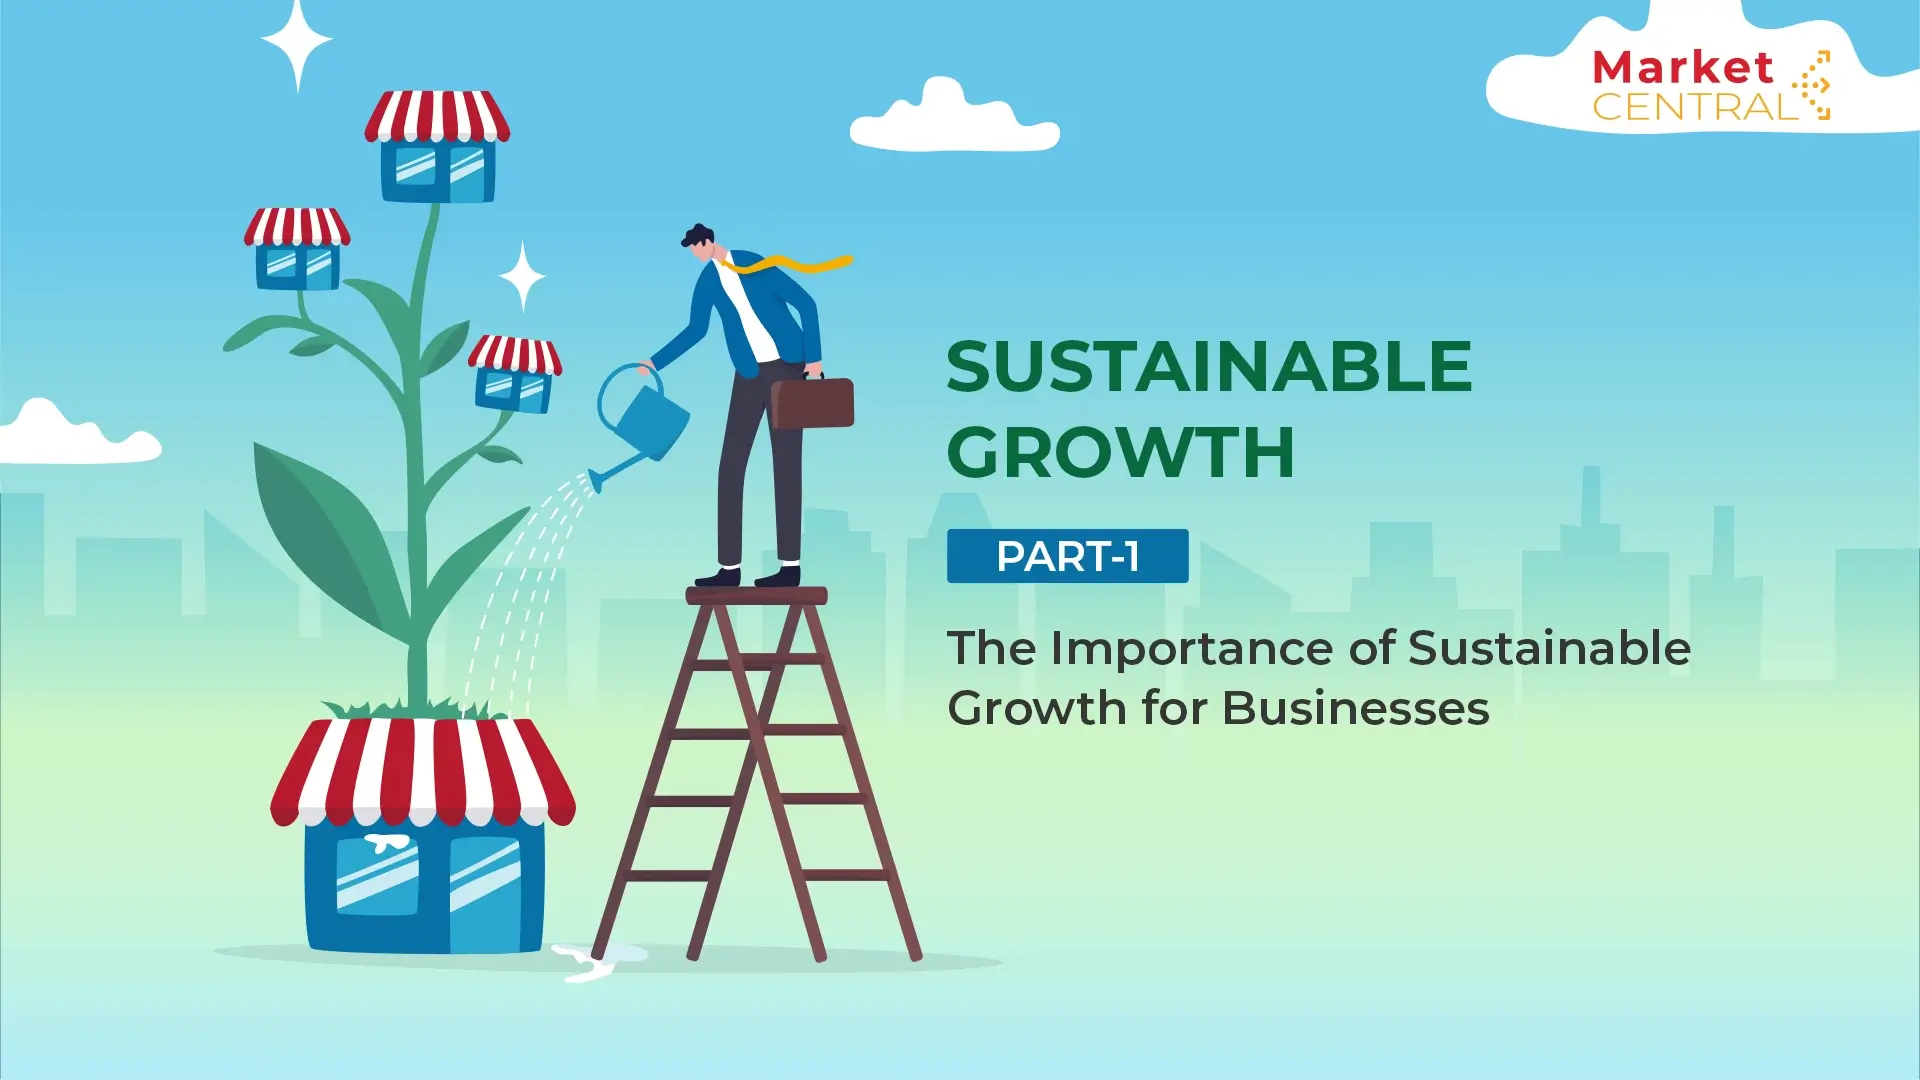 Sustainable business growth